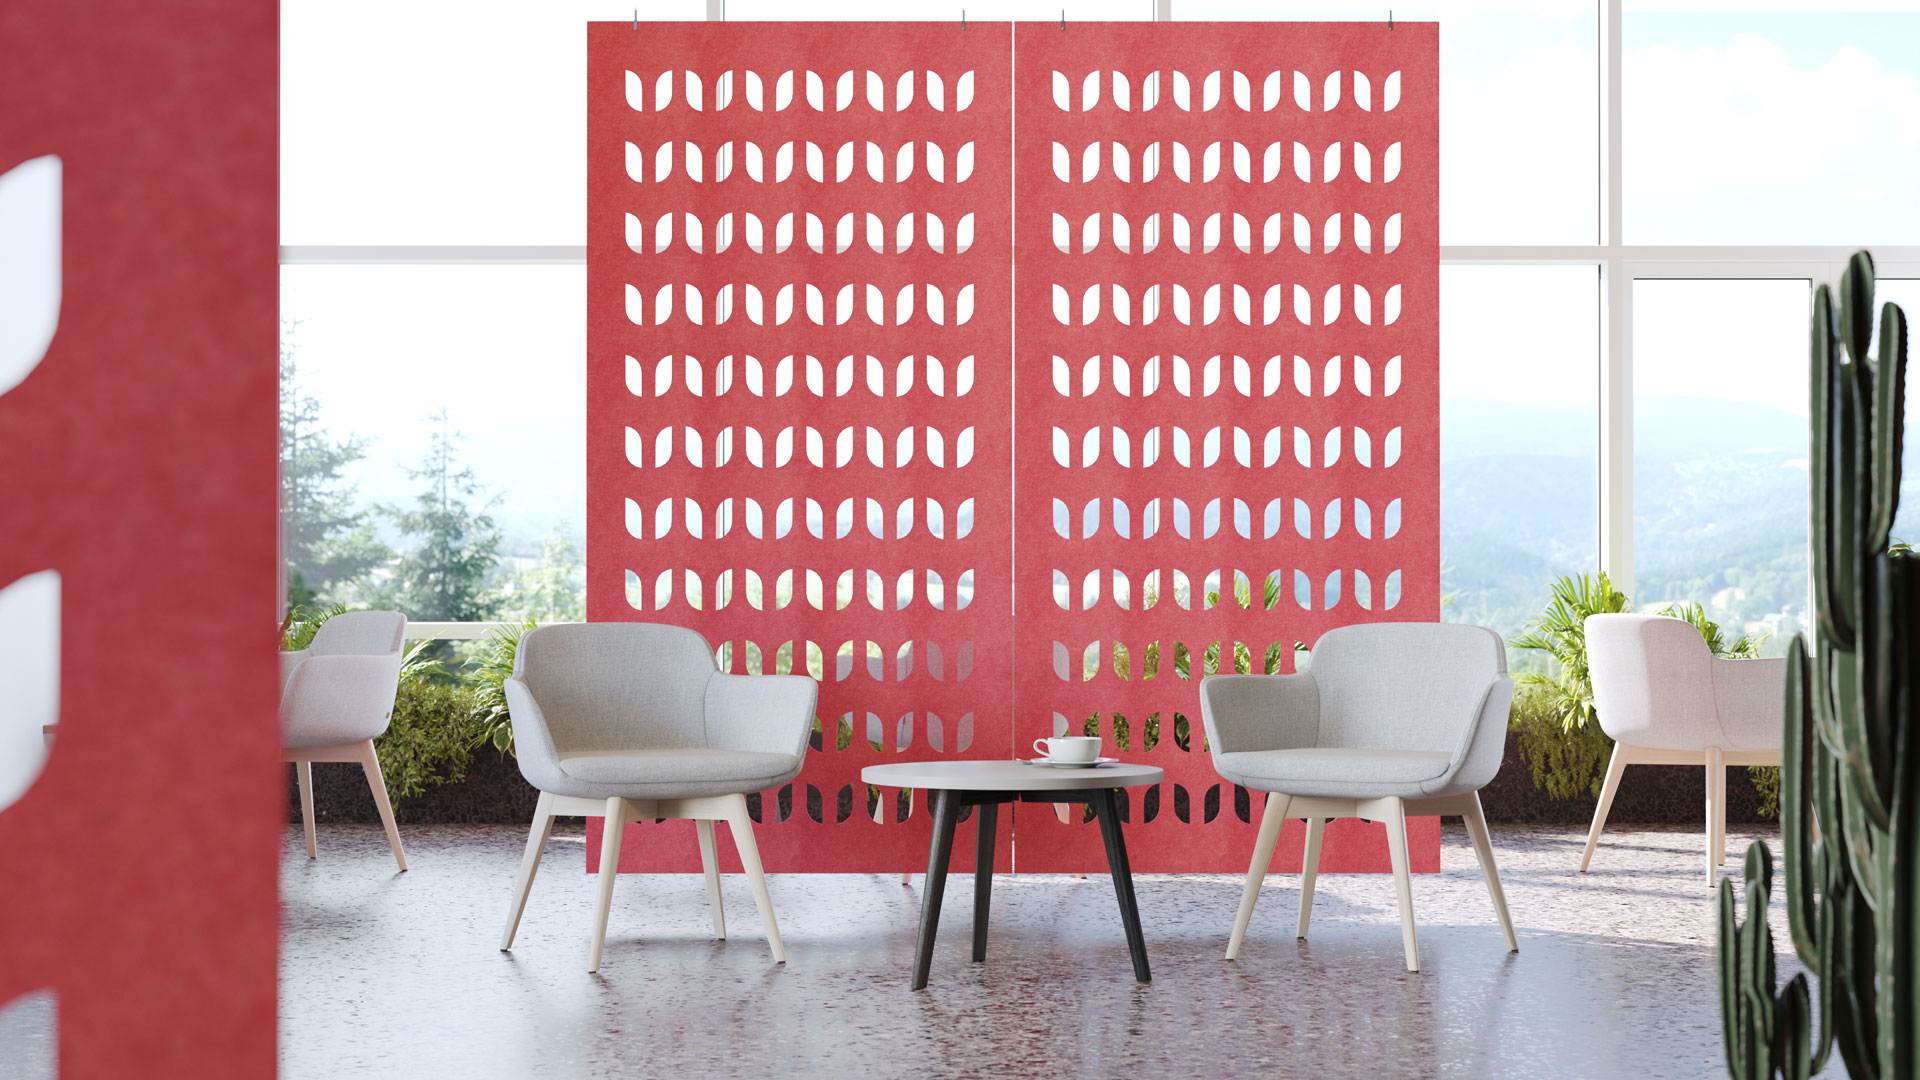 Acoustic Artwork PET partitions in dark pink with Flow pattern